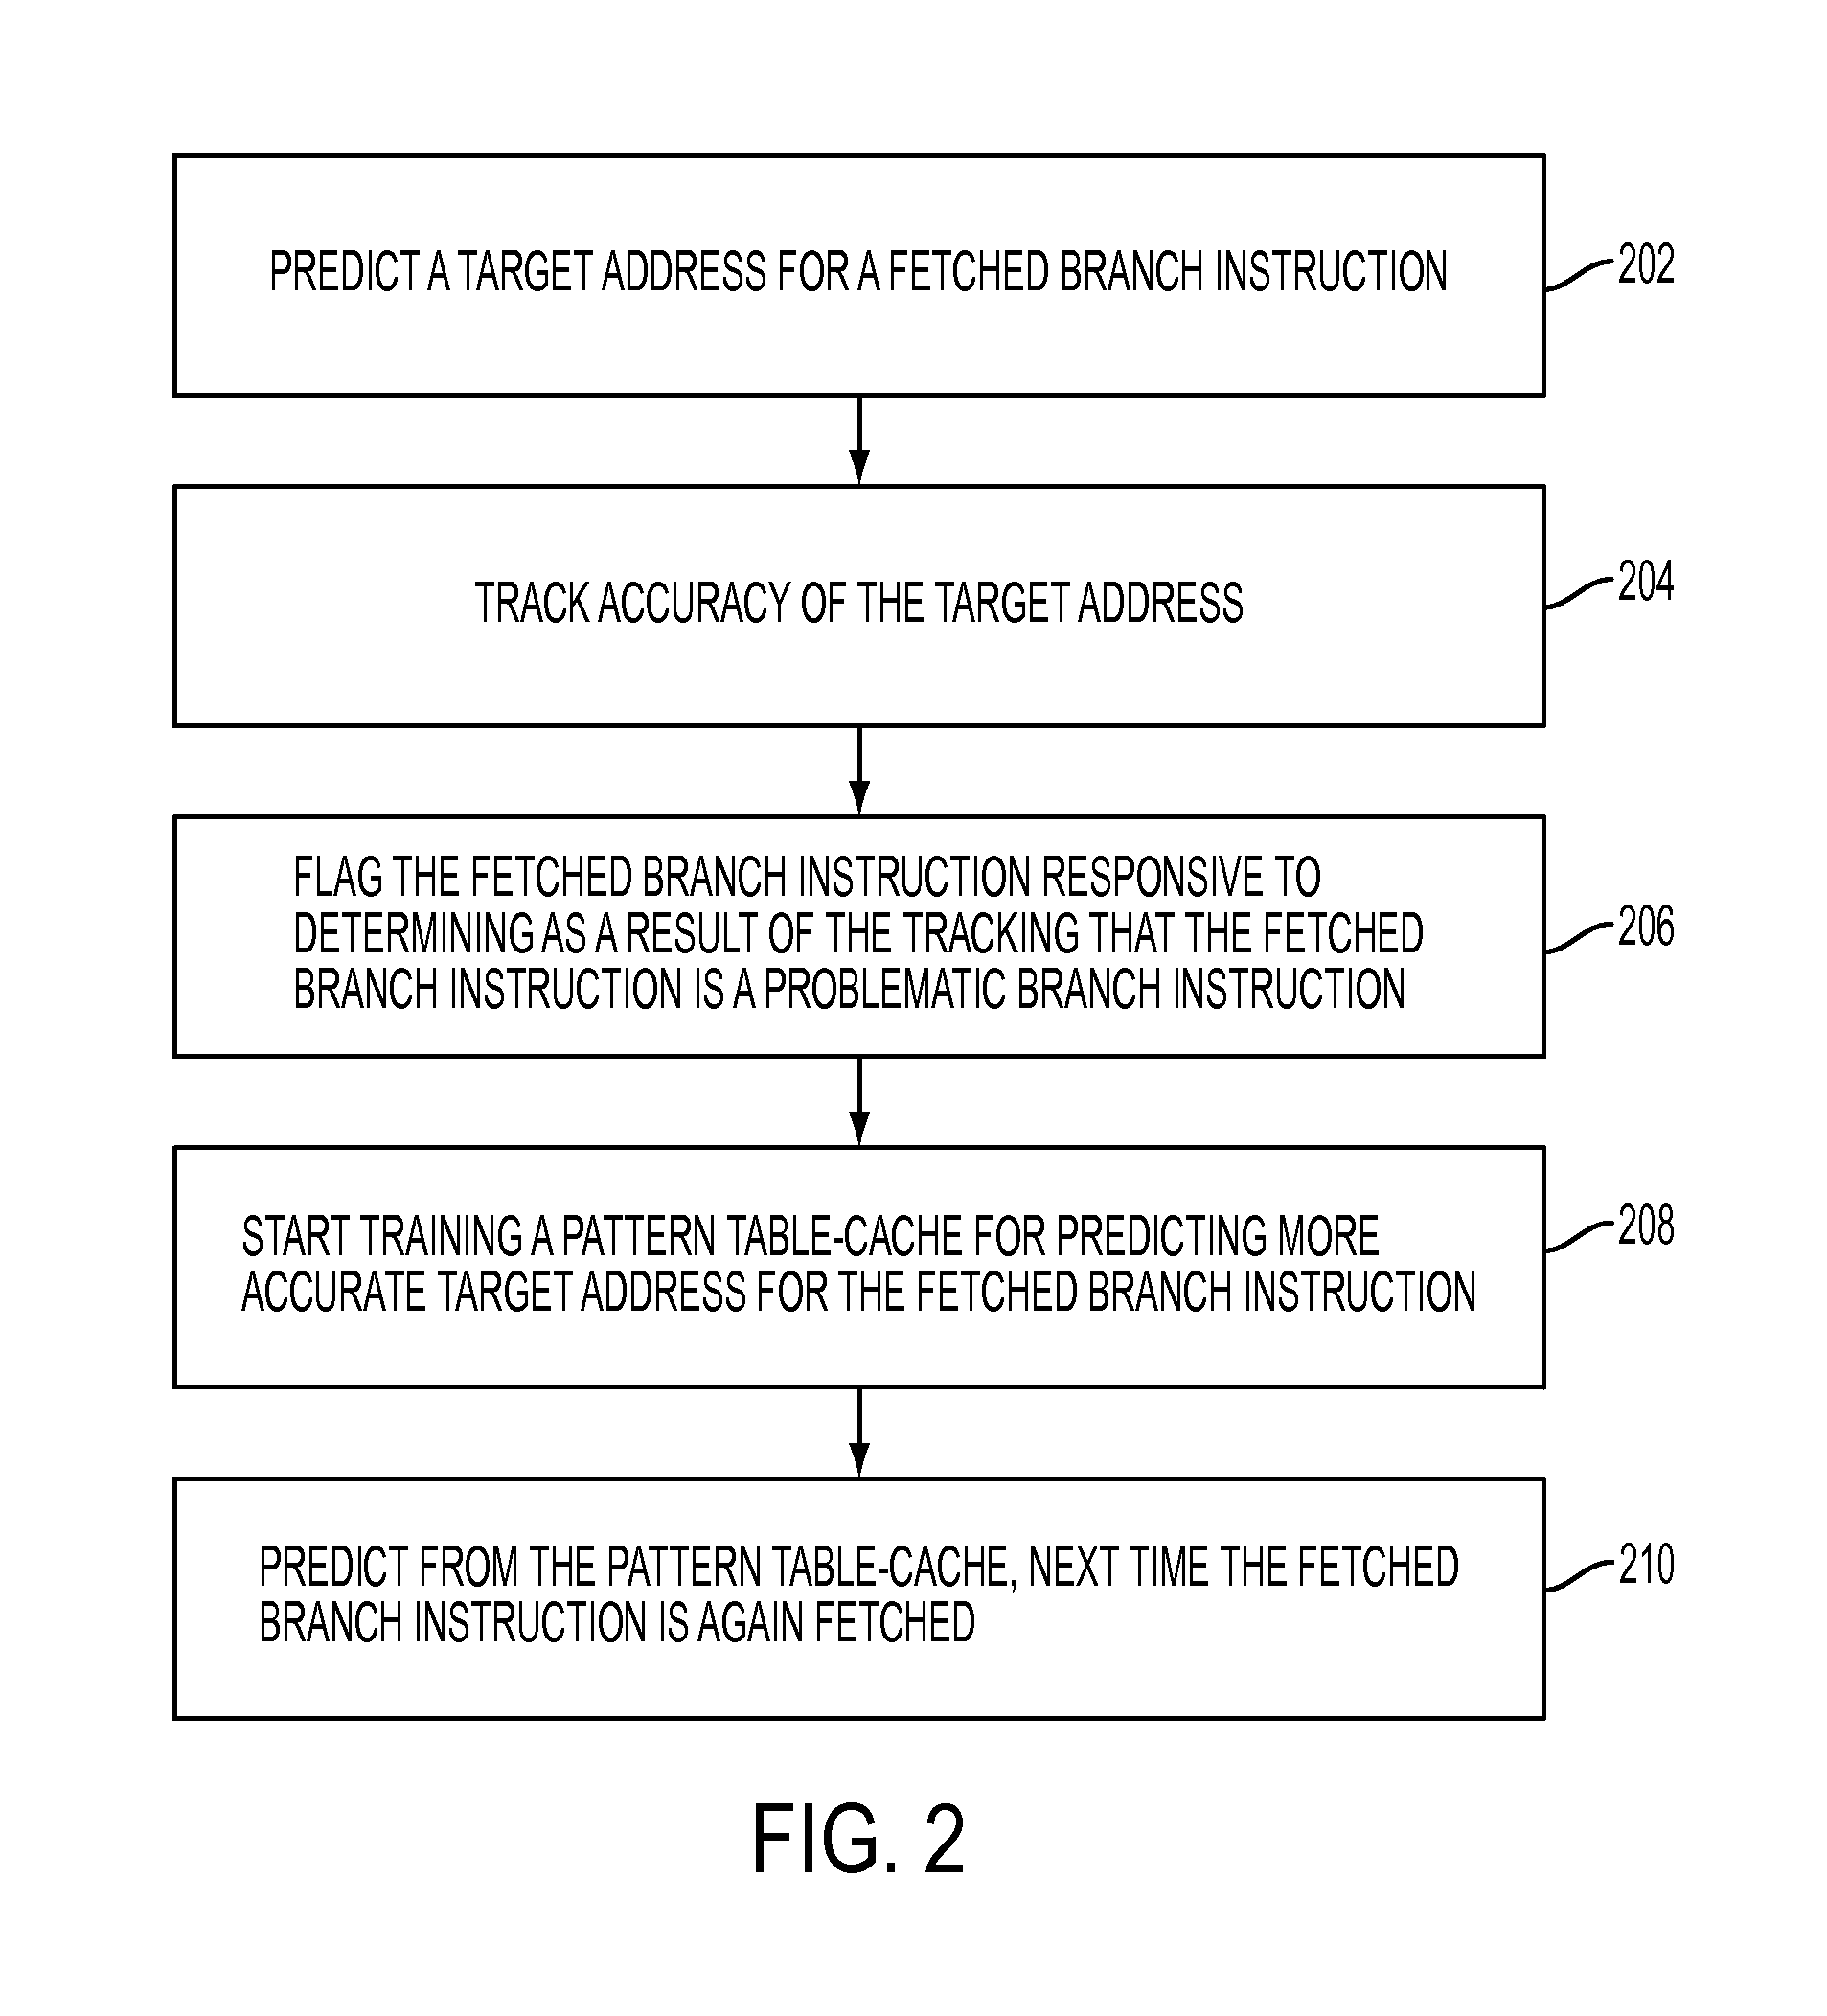 Predicting indirect branches using problem branch filtering and pattern cache